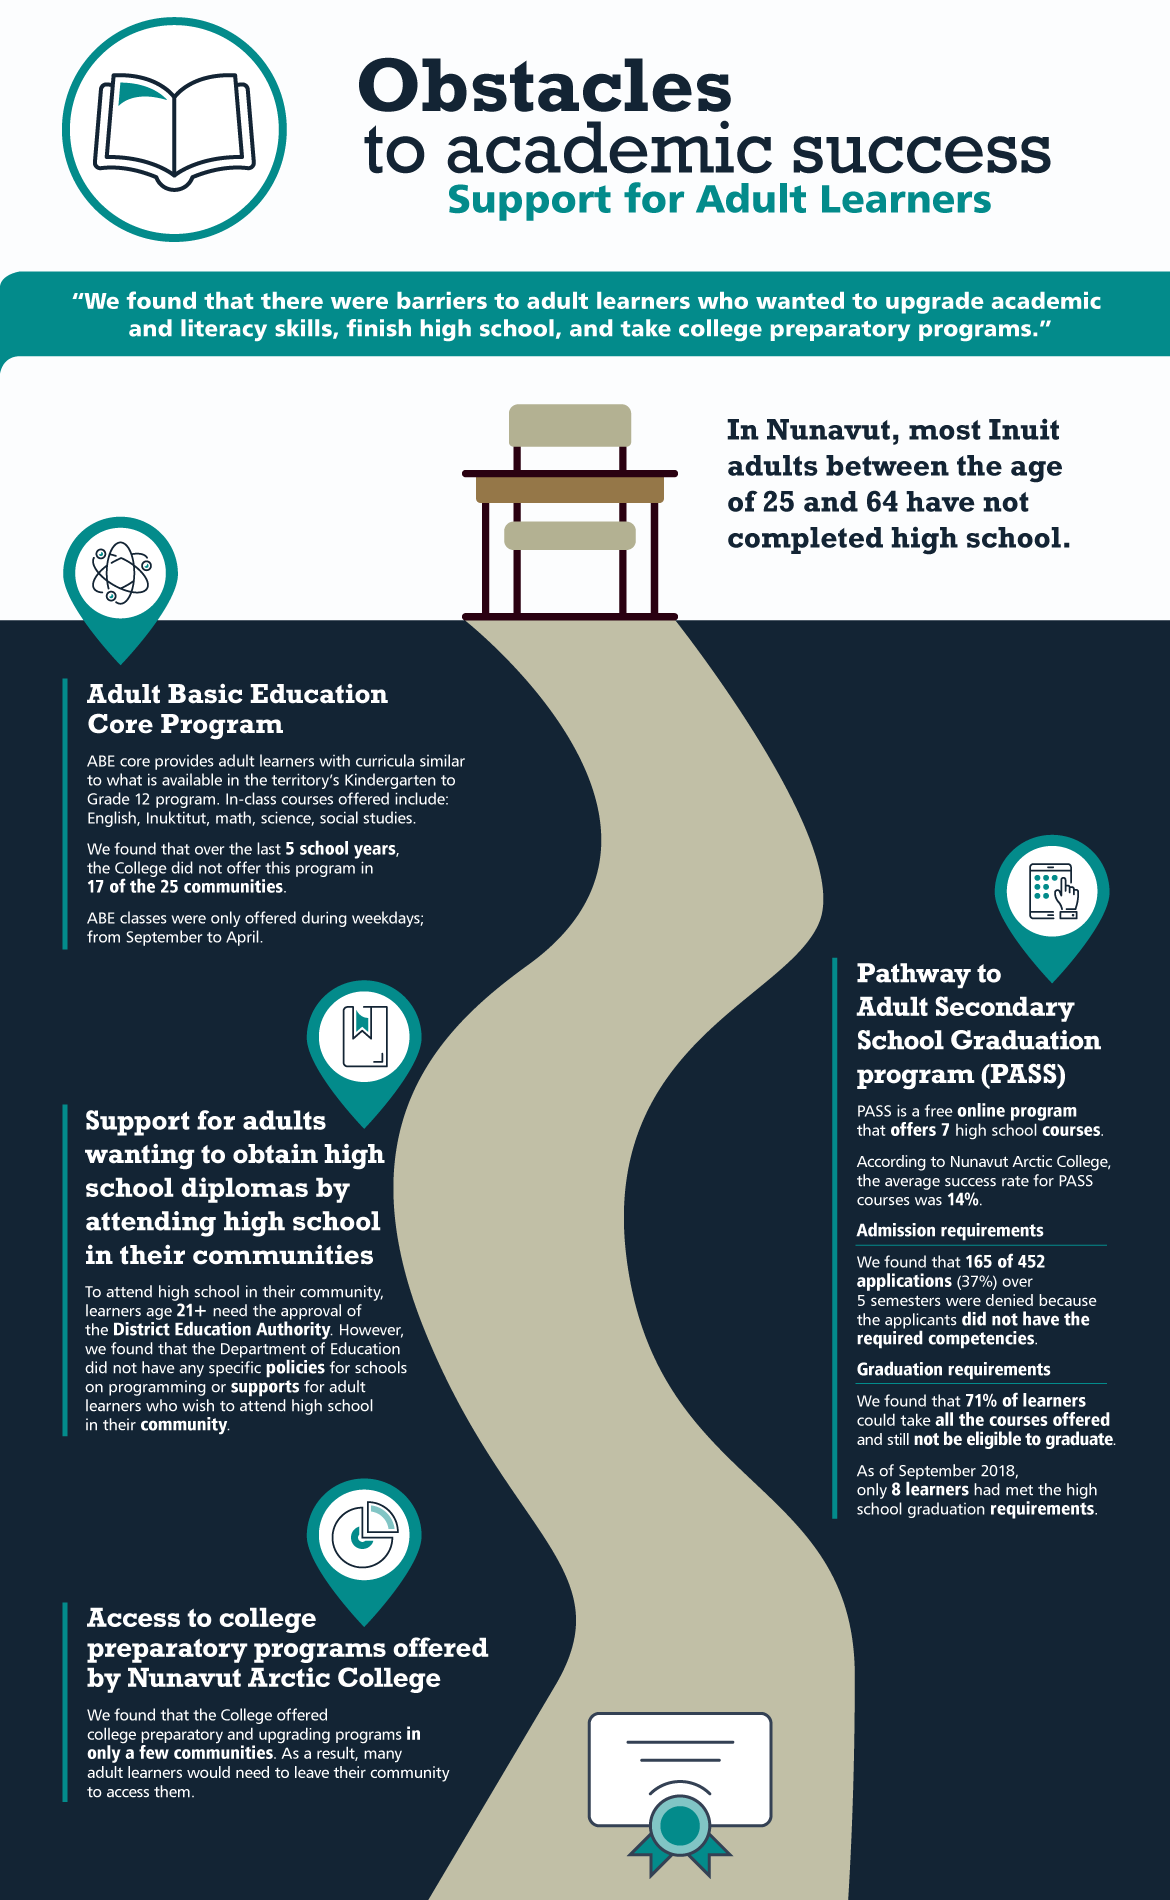 This infographic presents findings from the audit of support for high school students and adult learners in Nunavut